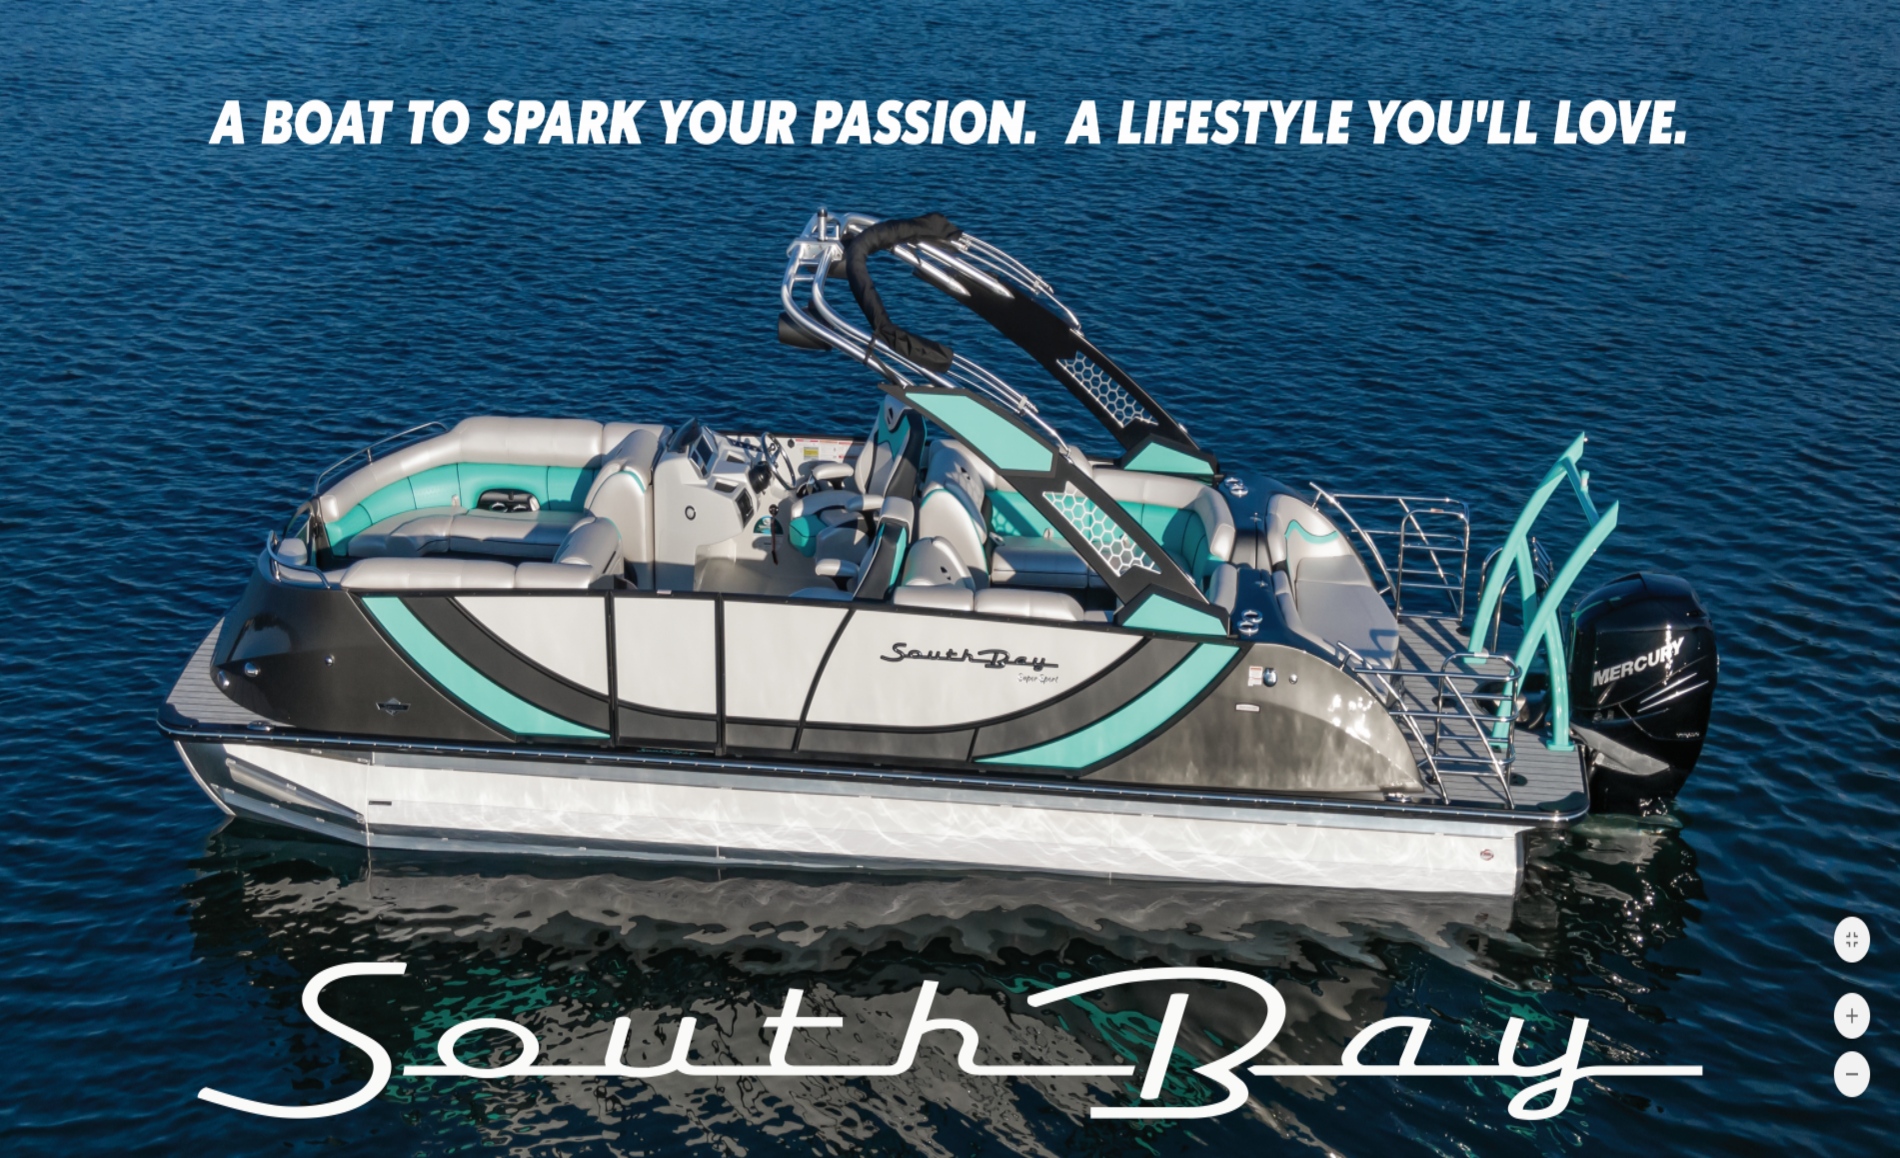 A Boat To Spark Your Passion. A Lifestyle You'll Love. Southbay boat on the water.